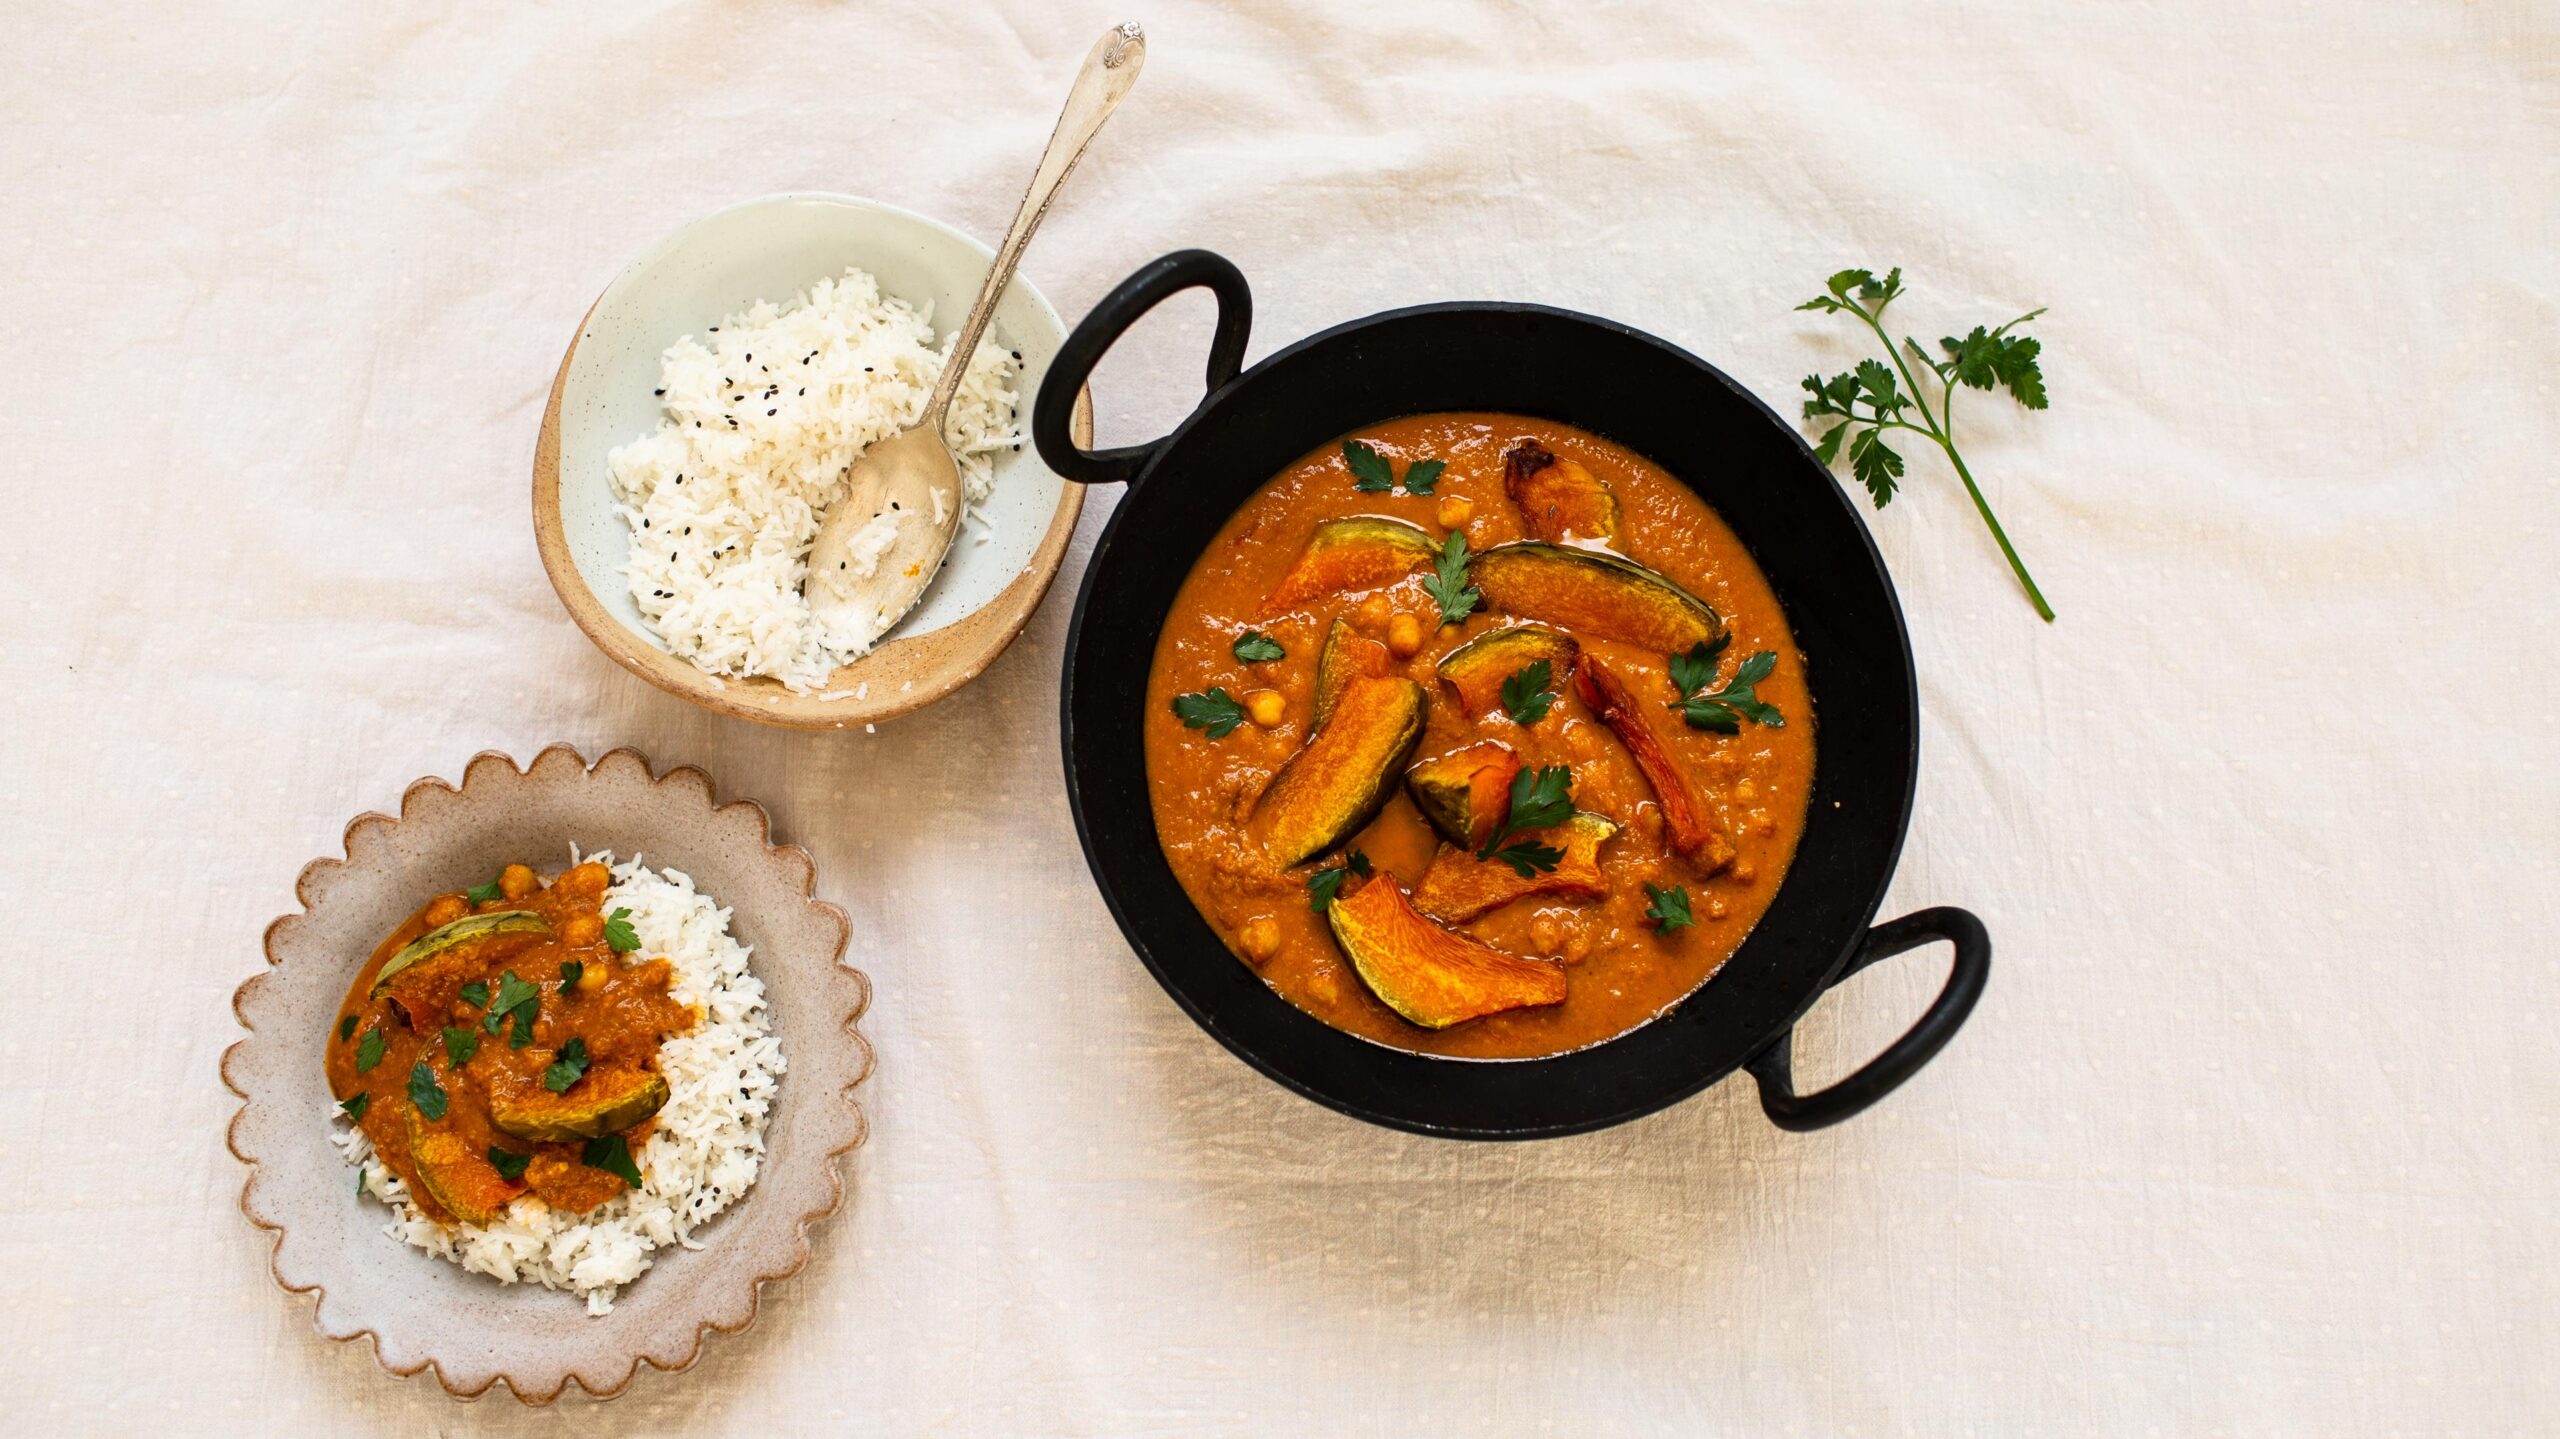  Satisfy your taste buds and soul with a bowl of hearty and fragrant vegan chickpea Tikka Masala